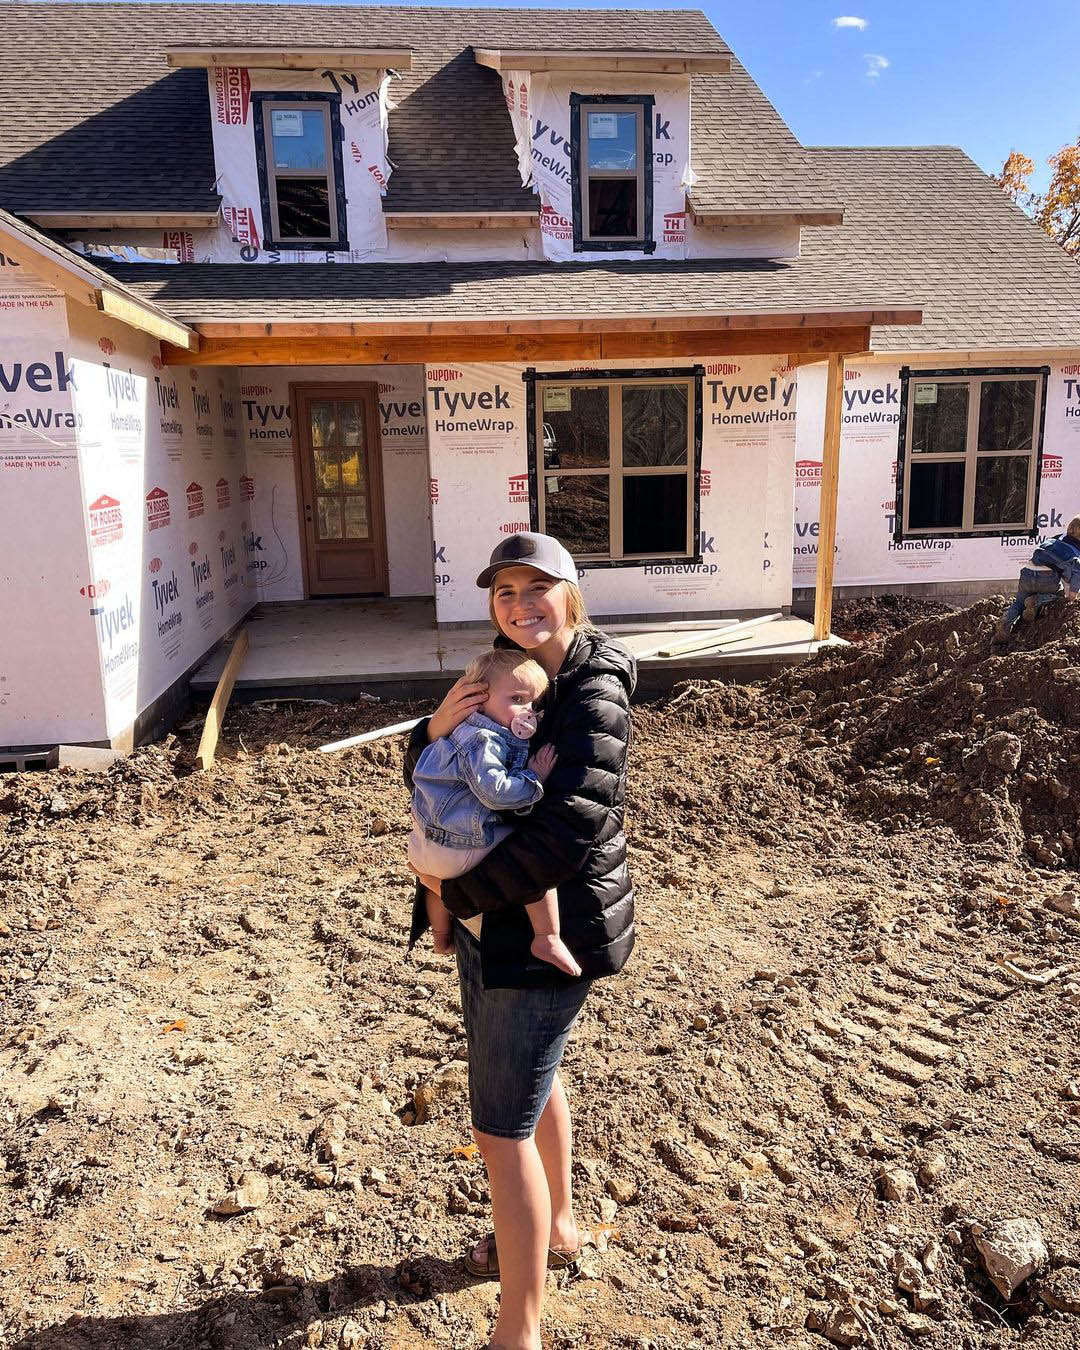 Joy-Anna Duggar was slammed, as she took her two children to a construction site